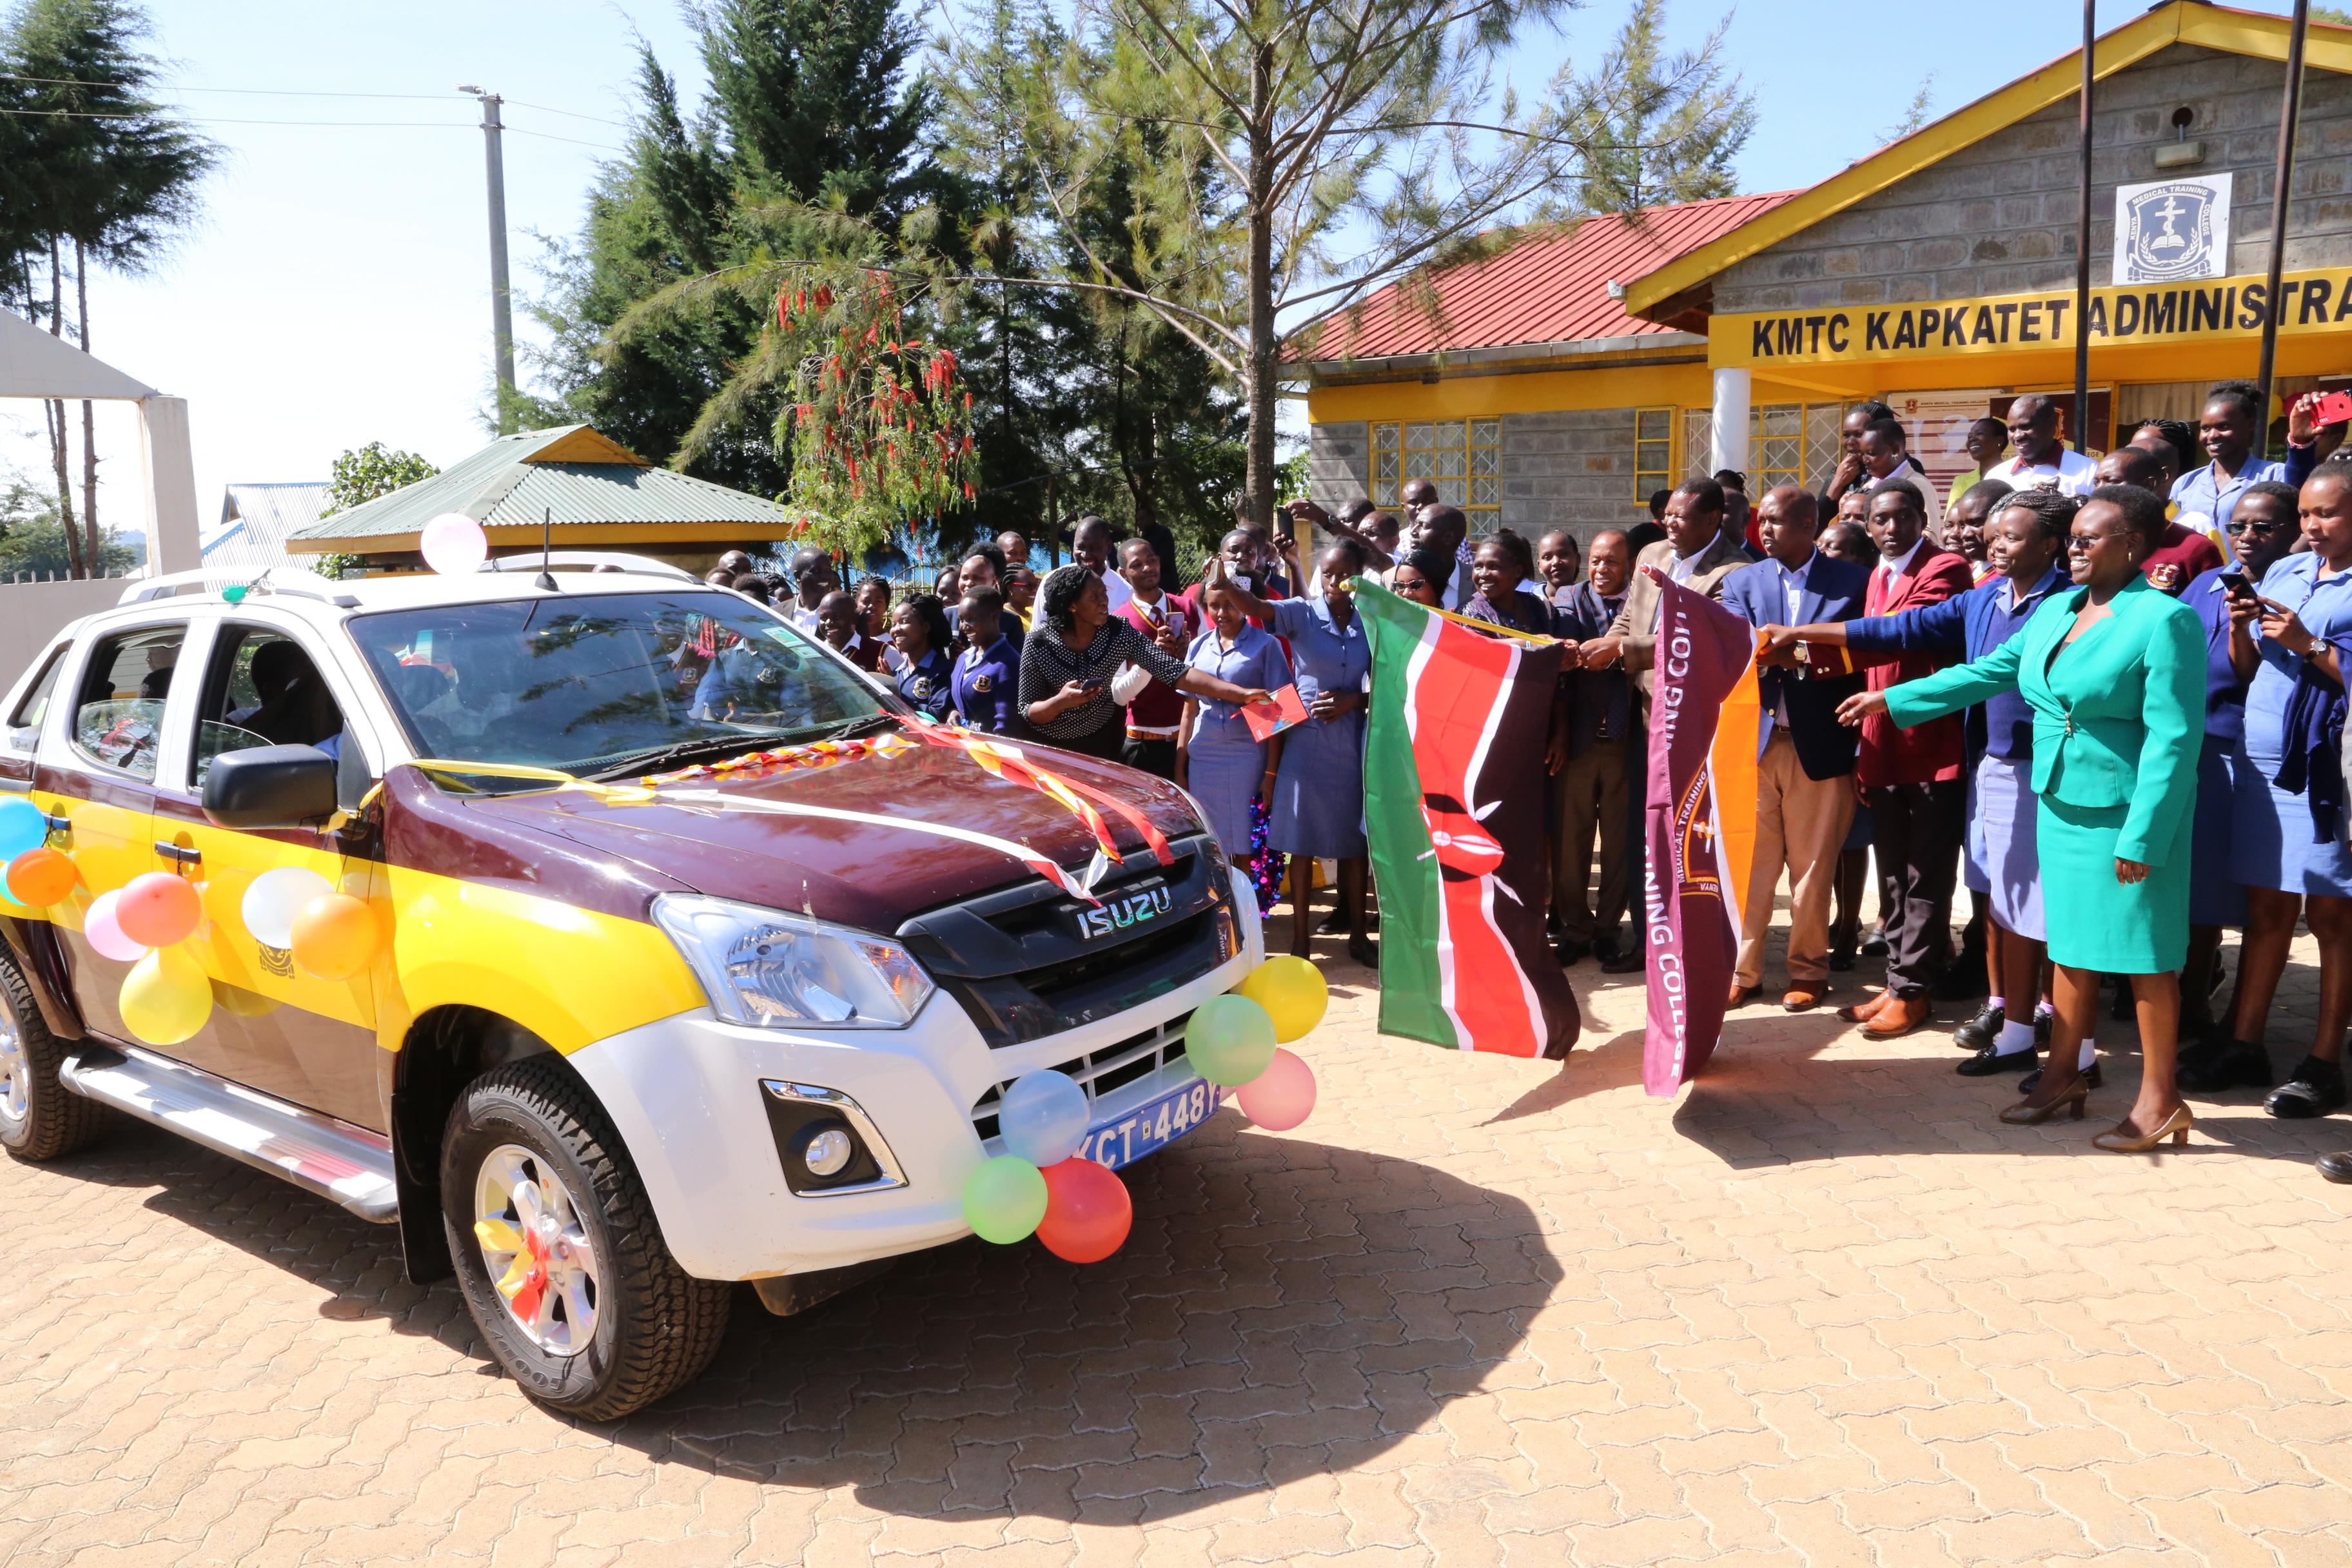 KMTC Board fulfills promise as Kapkatet Campus receives new vehicle